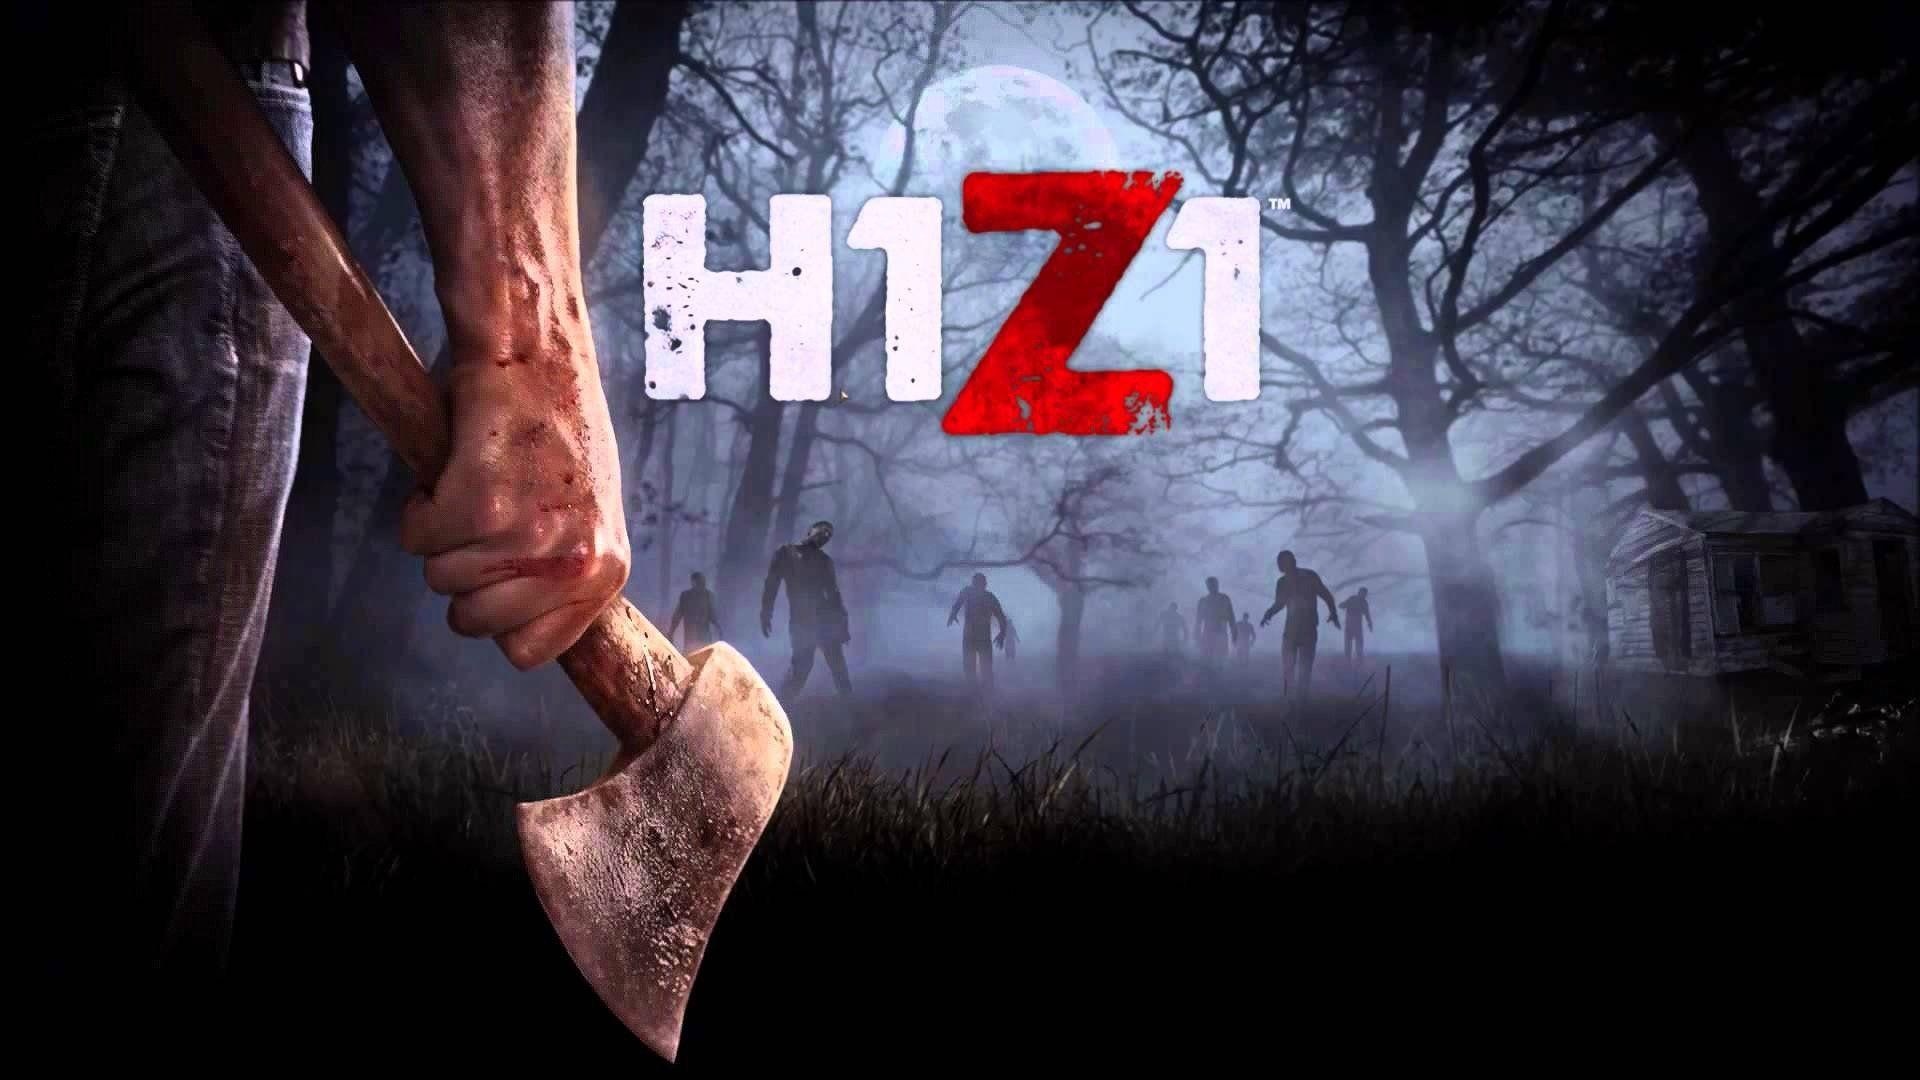 HD wallpaper, Console Gaming, 1920X1080 Full Hd Desktop, Hd Backgrounds, Gaming Experience, Desktop 1080P H1Z1 Background Photo, H1Z1 Ps4 Wallpapers